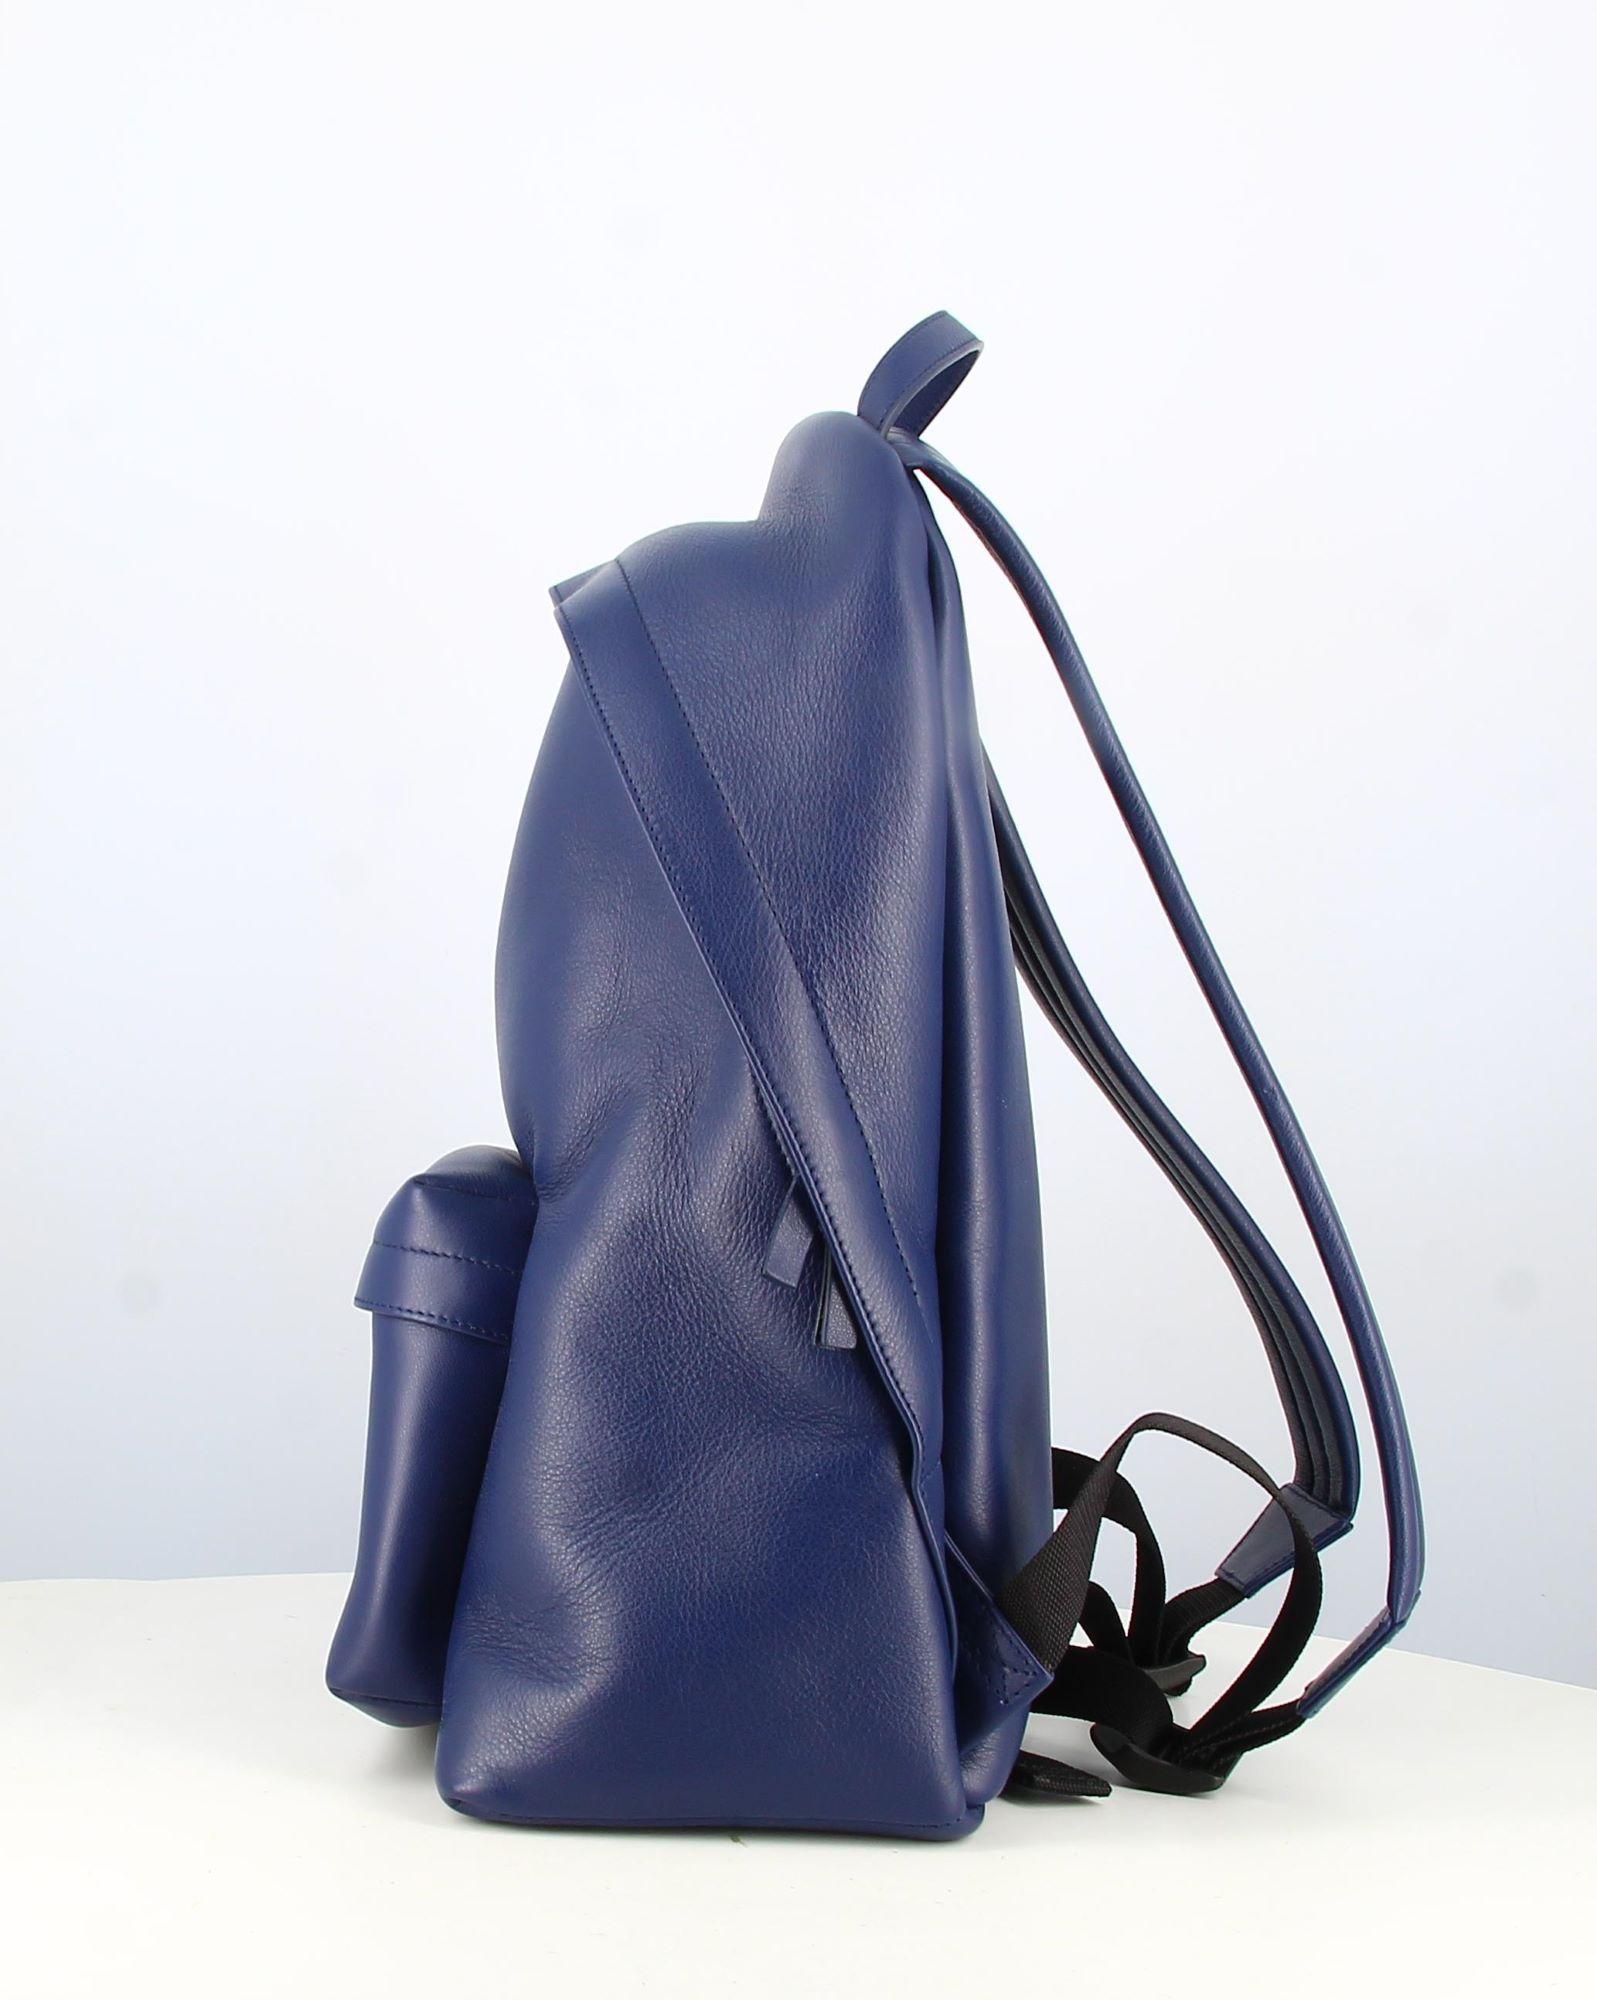 

Balenciaga Backpack Blue Leather

- Good condition, has slight traces of wear appeared with time.
- Balenciaga backpack in blue leather.
- White Balenciaga logo on the front.
- Blue leather hanses
- Pocket on the front.
- Inside: black fabric,